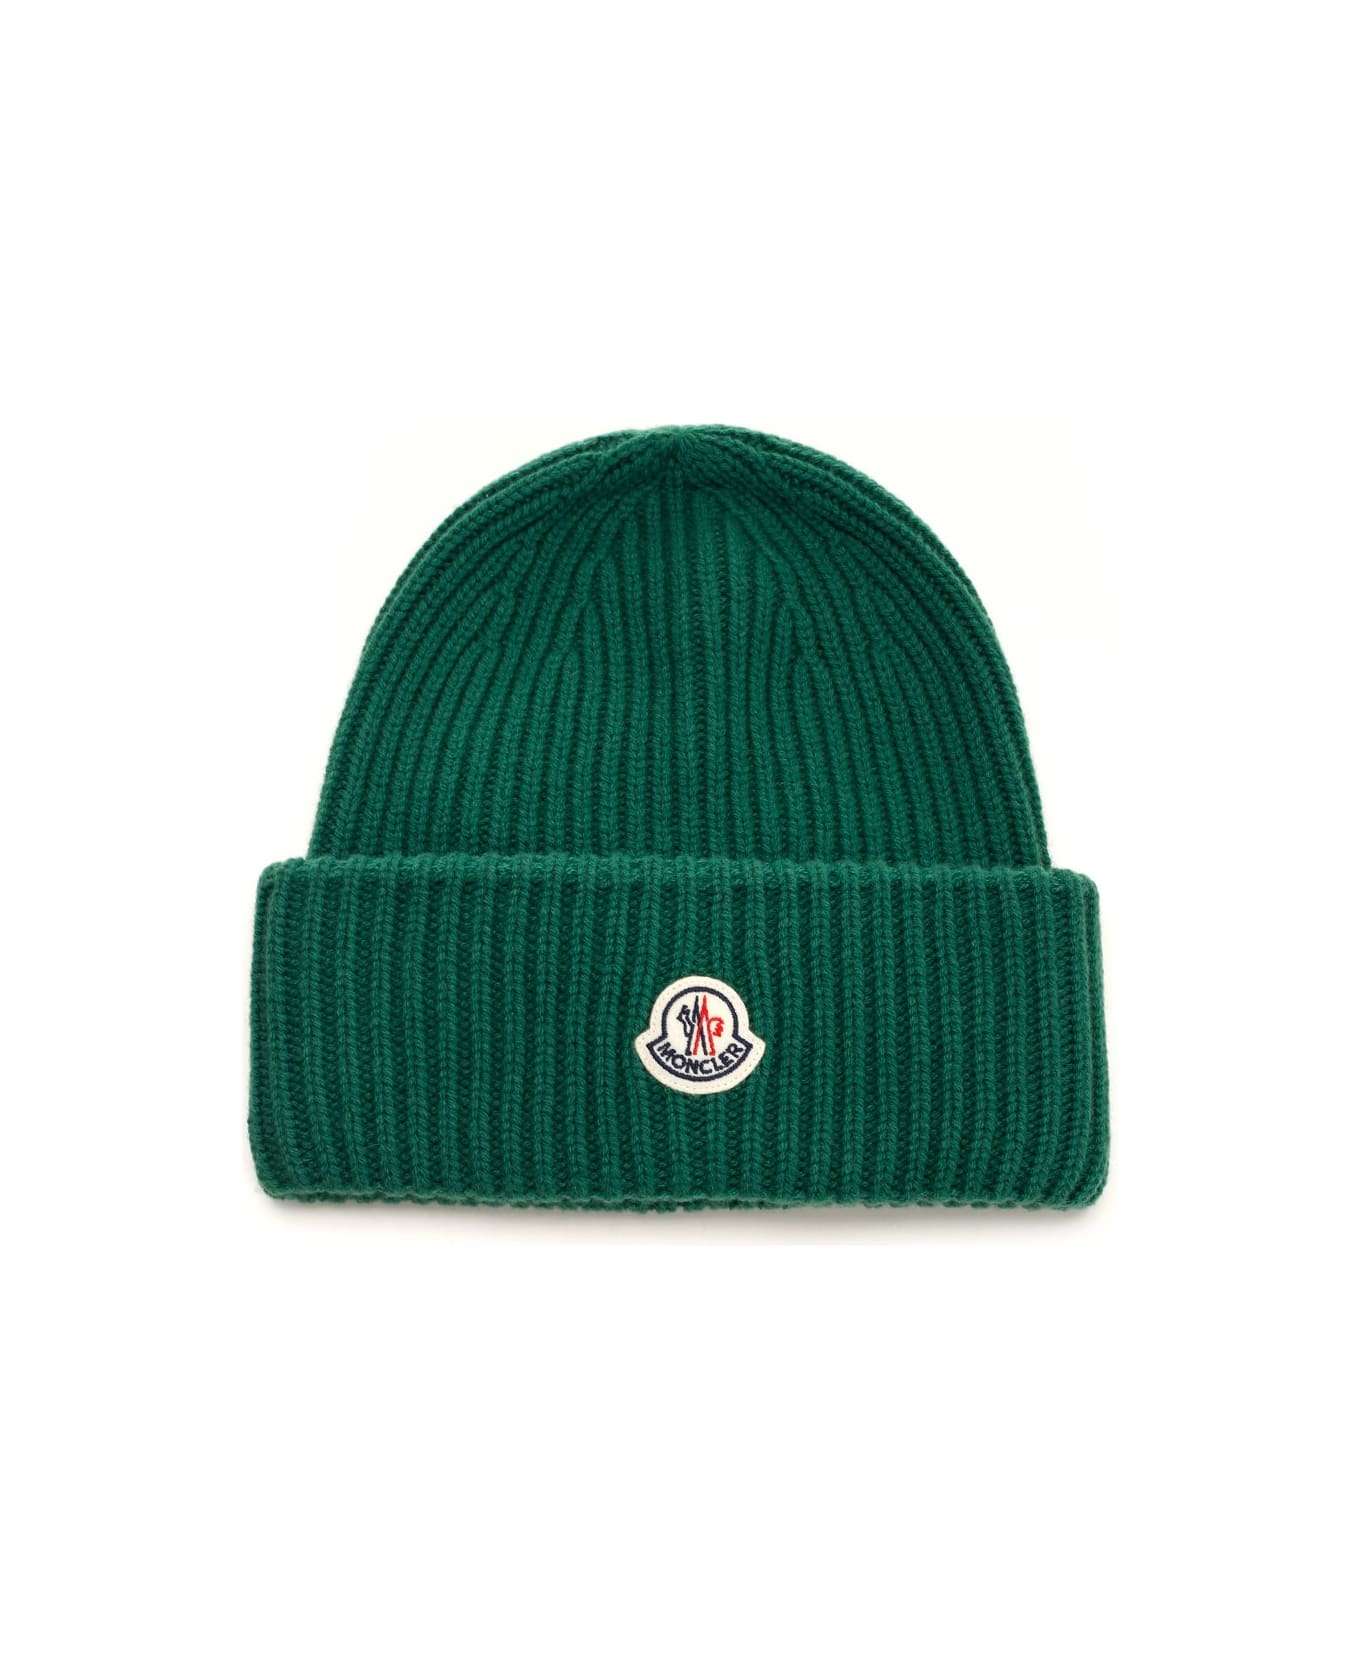 Moncler Wool And Cashmere Beanie - Green